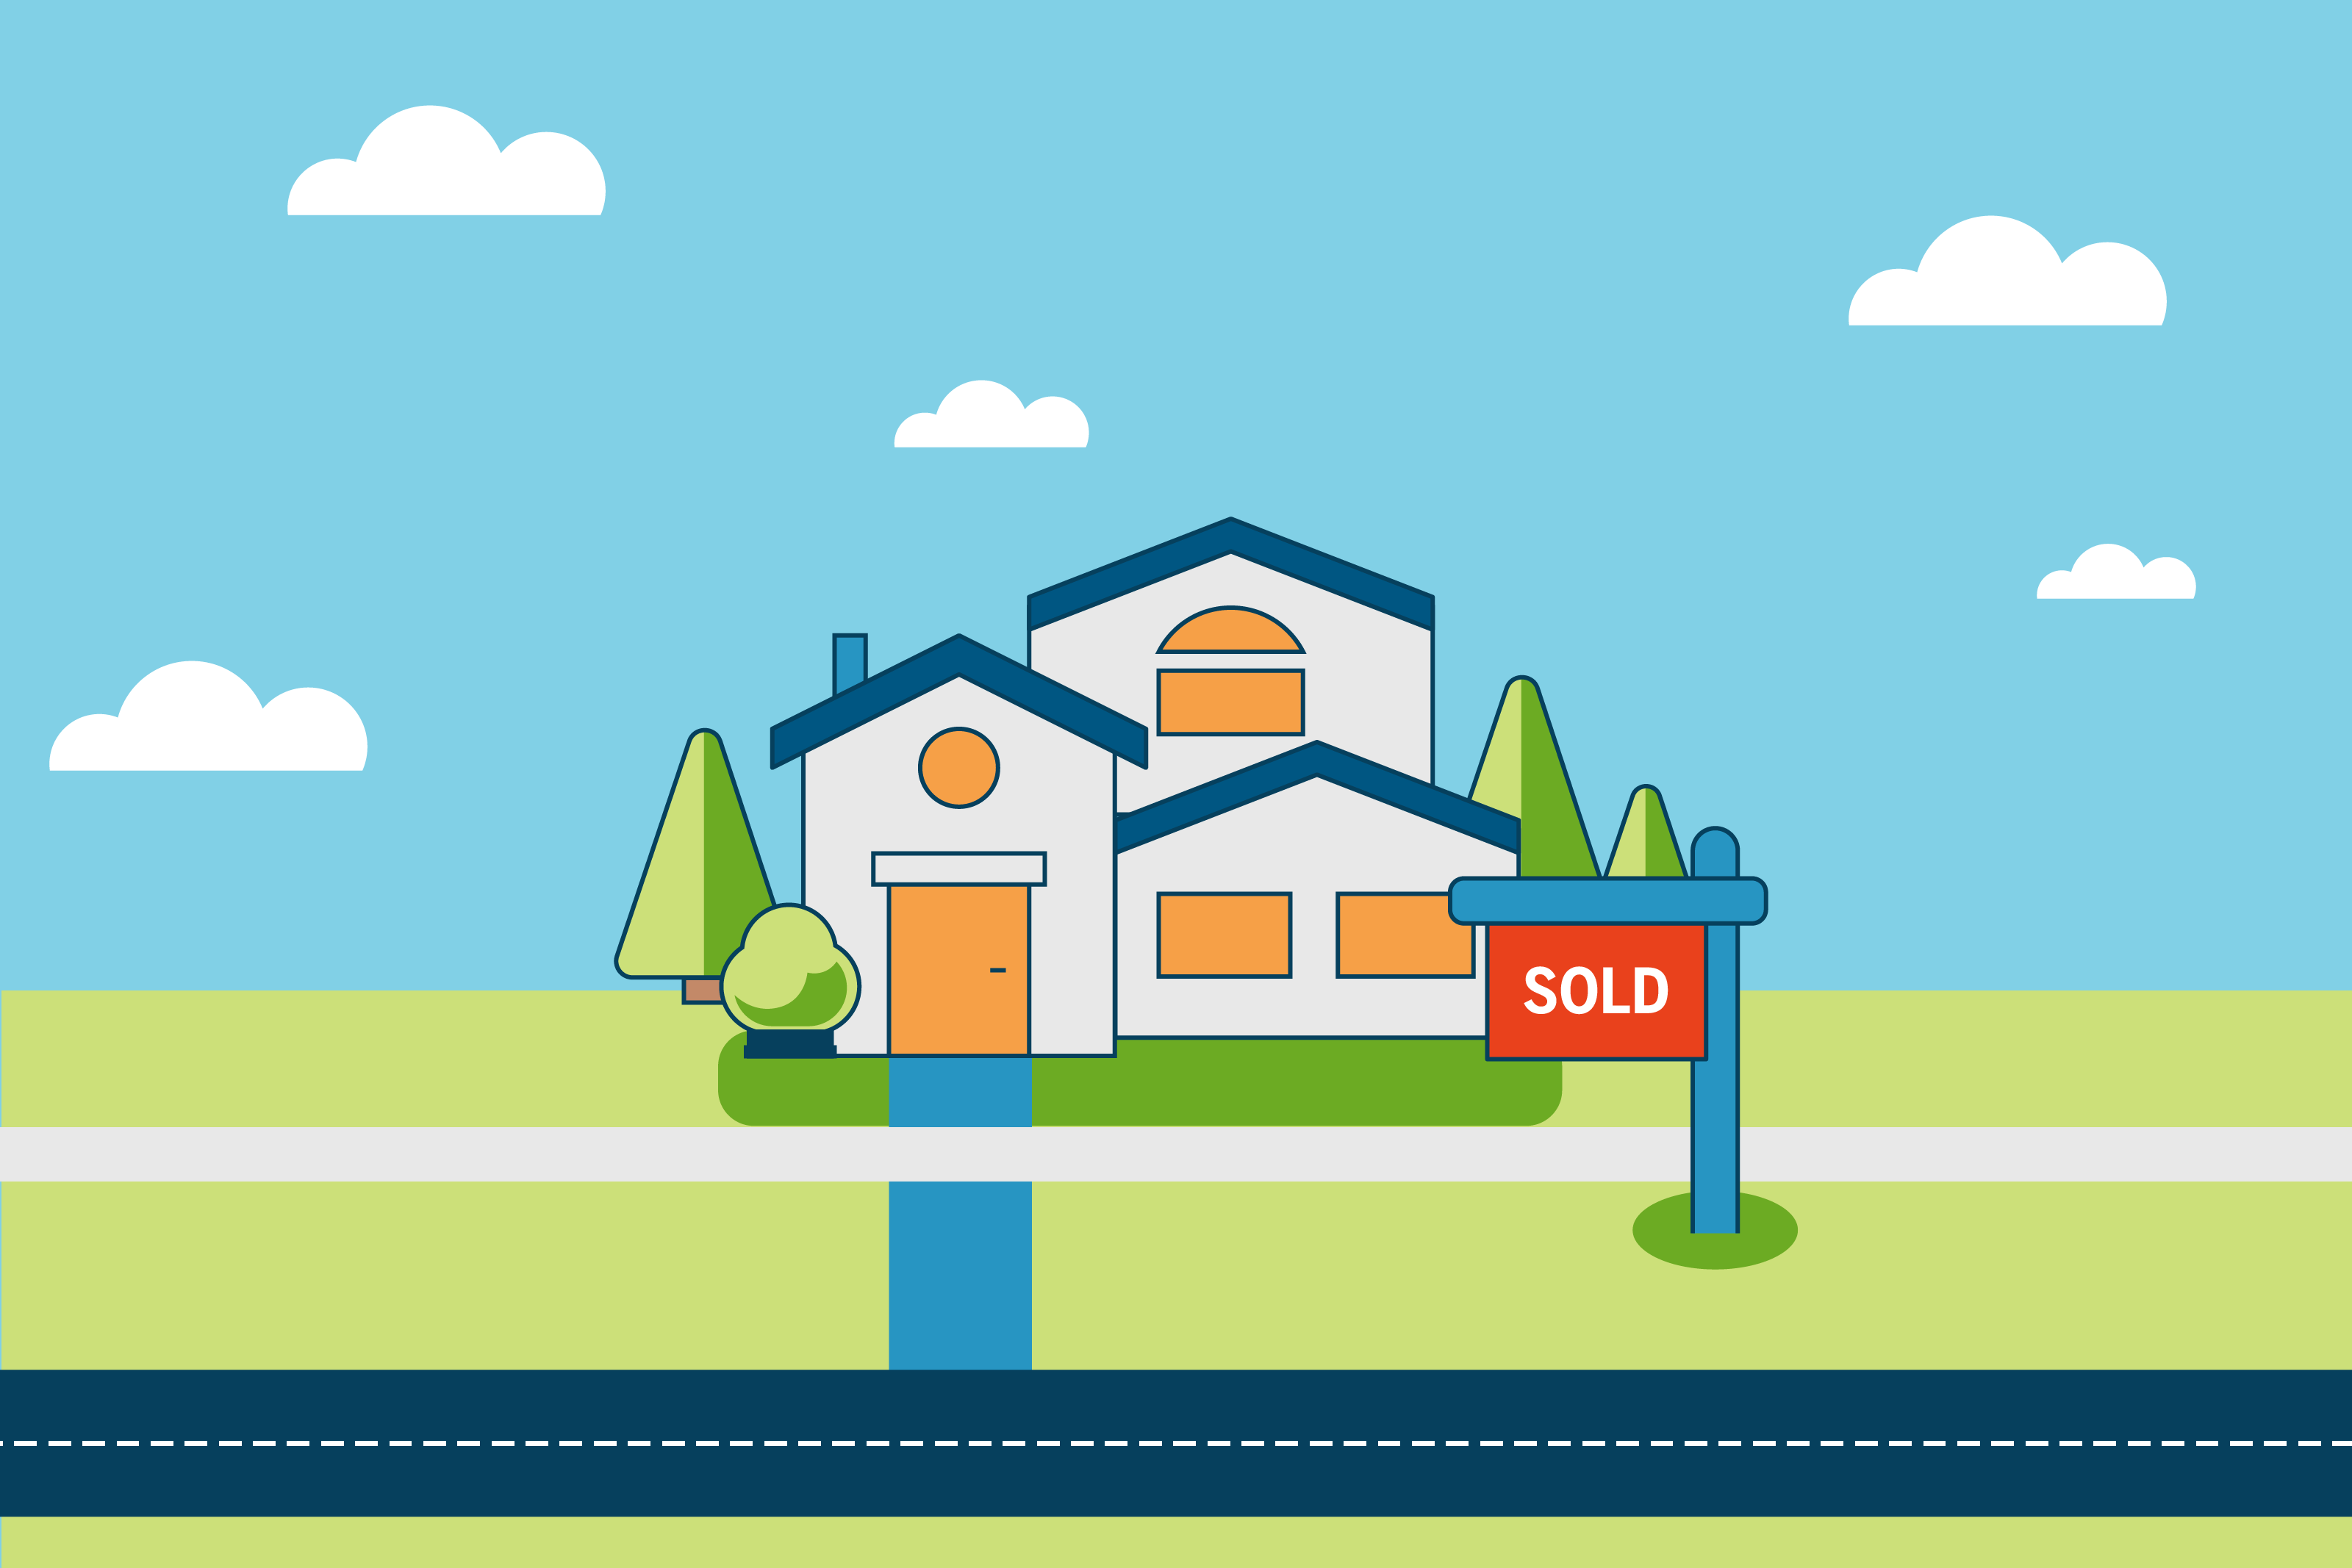 Professional Graphic Designer: Assess Your Home-Selling Strategy